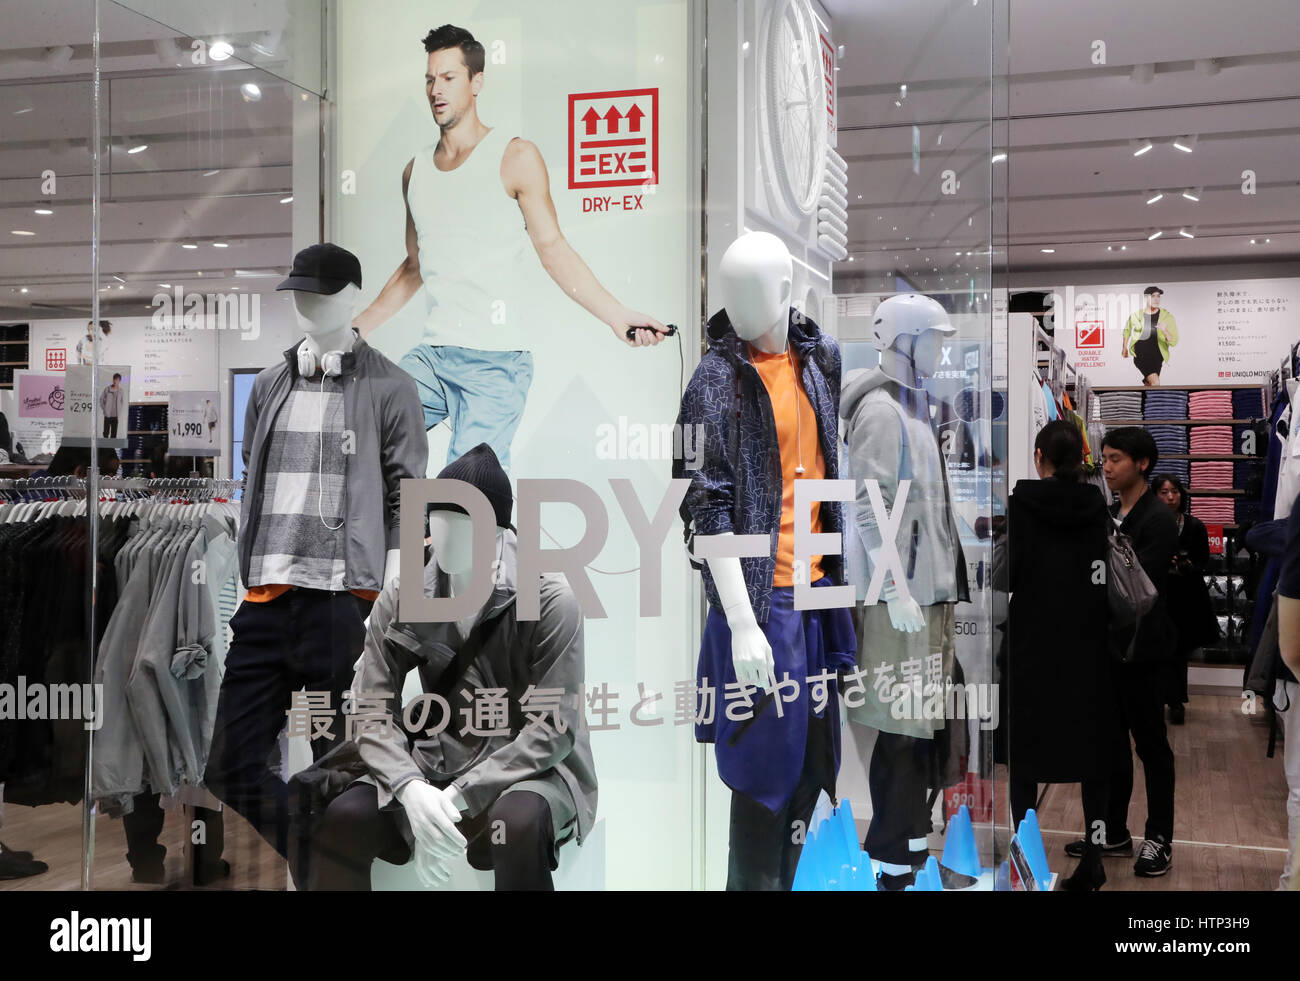 Tokyo, Japan. 14th Mar, 2017. Newly concepted Uniqlo "Uniqlo Move" is  displayed for presss at the Takashimaya department store in Tokyo's  Shinjuku district on Monday, March 14, 2017. The Uniqlo Move which